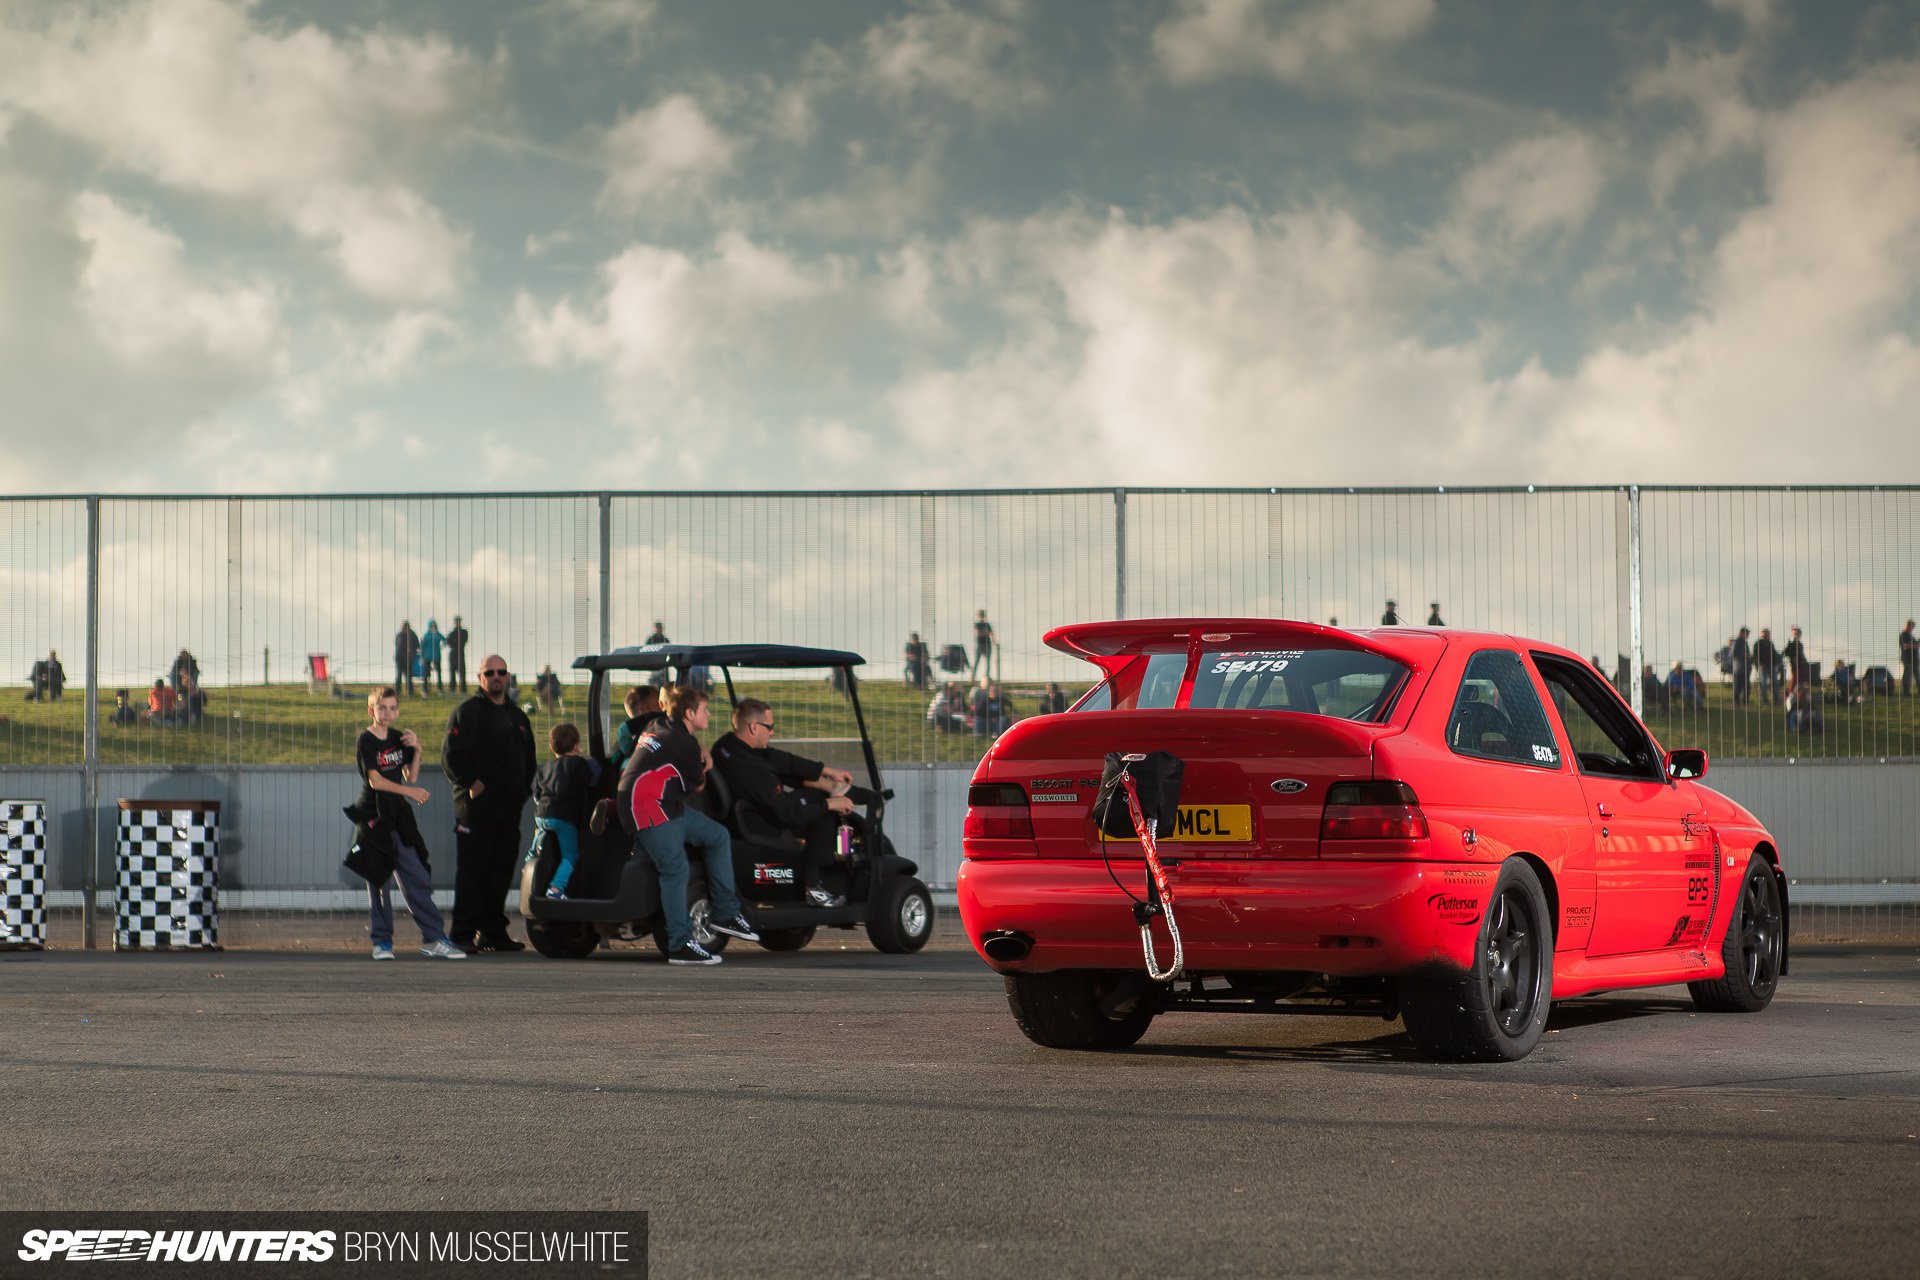 cosworth, Drag, Racing, Ford, Escort, Rs, Tuning, Race Wallpaper